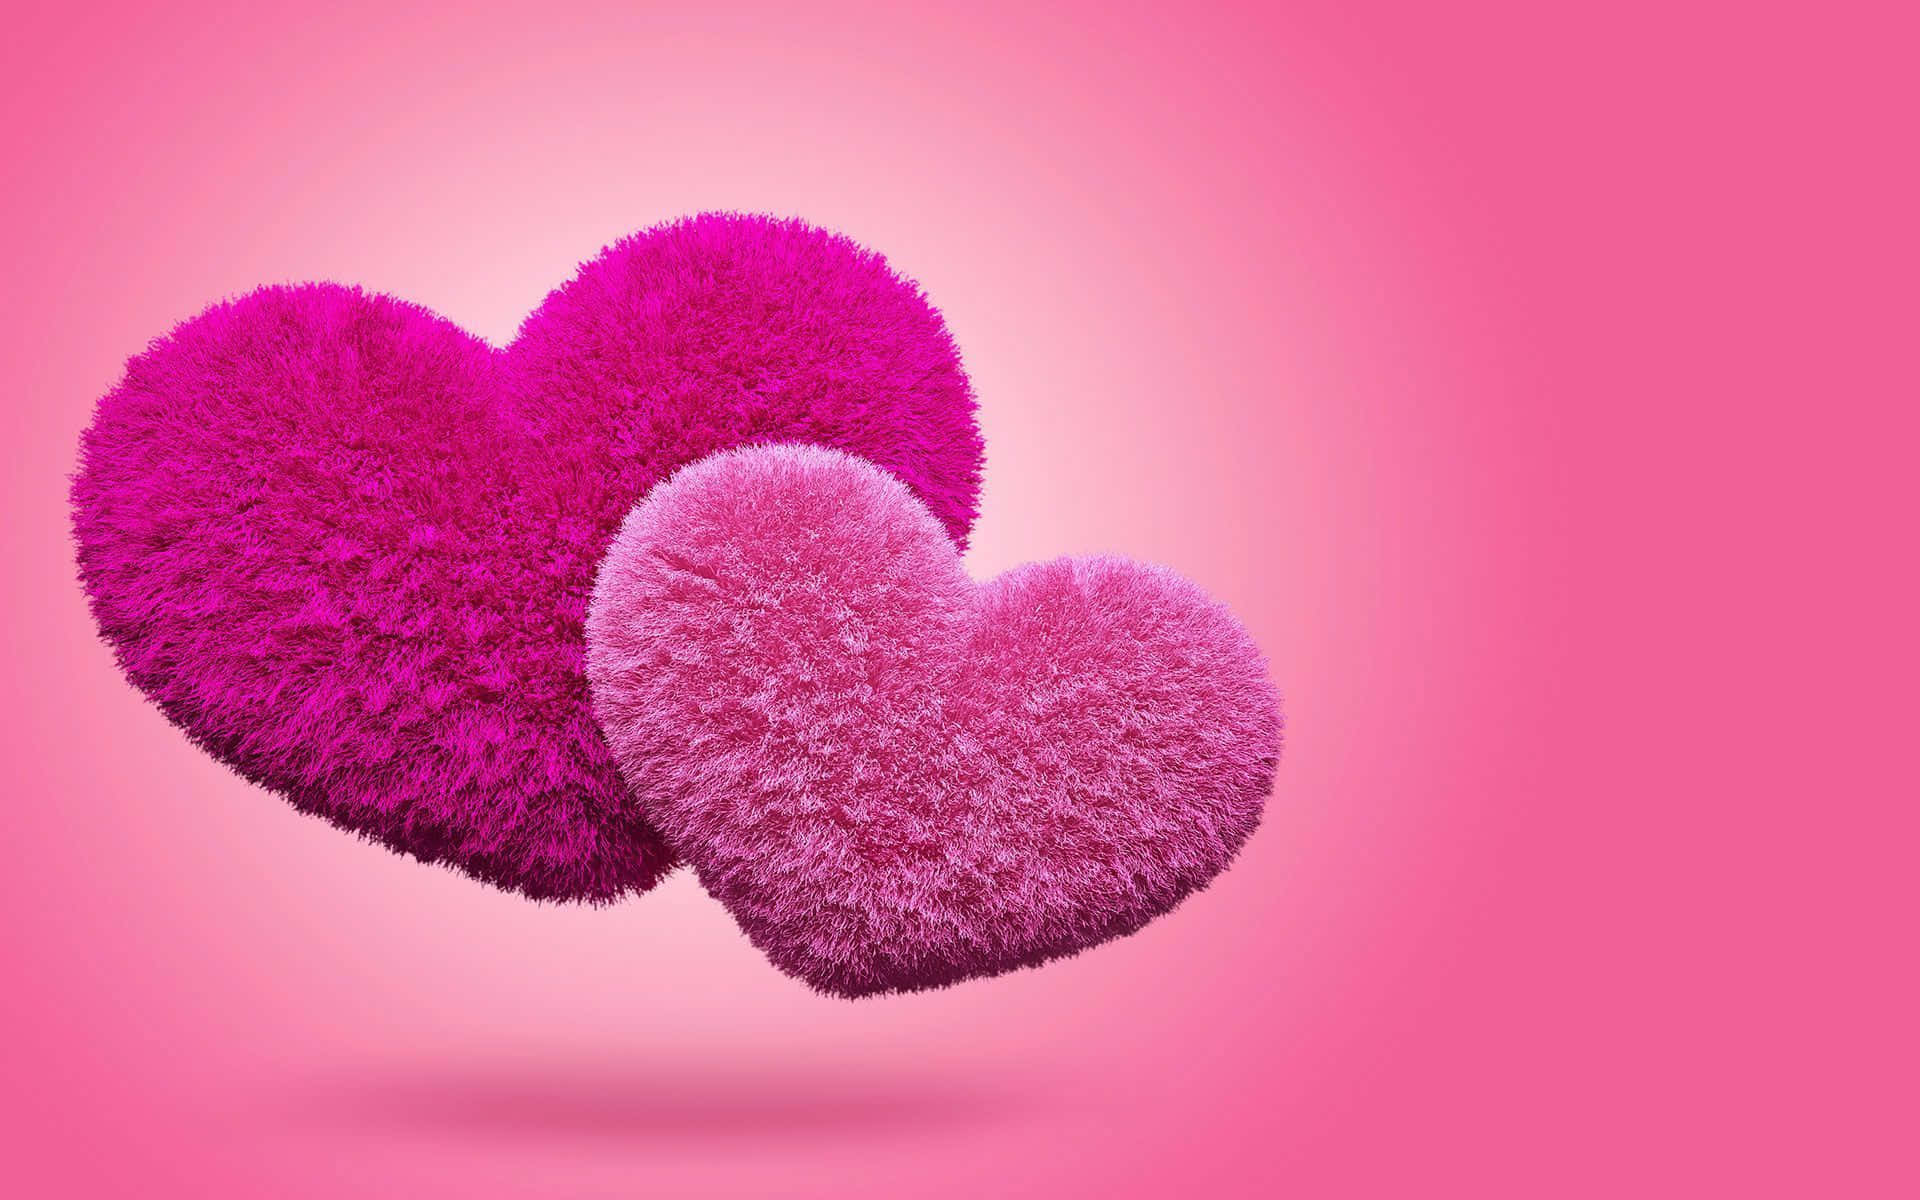 Show your love with a beautiful pink heart